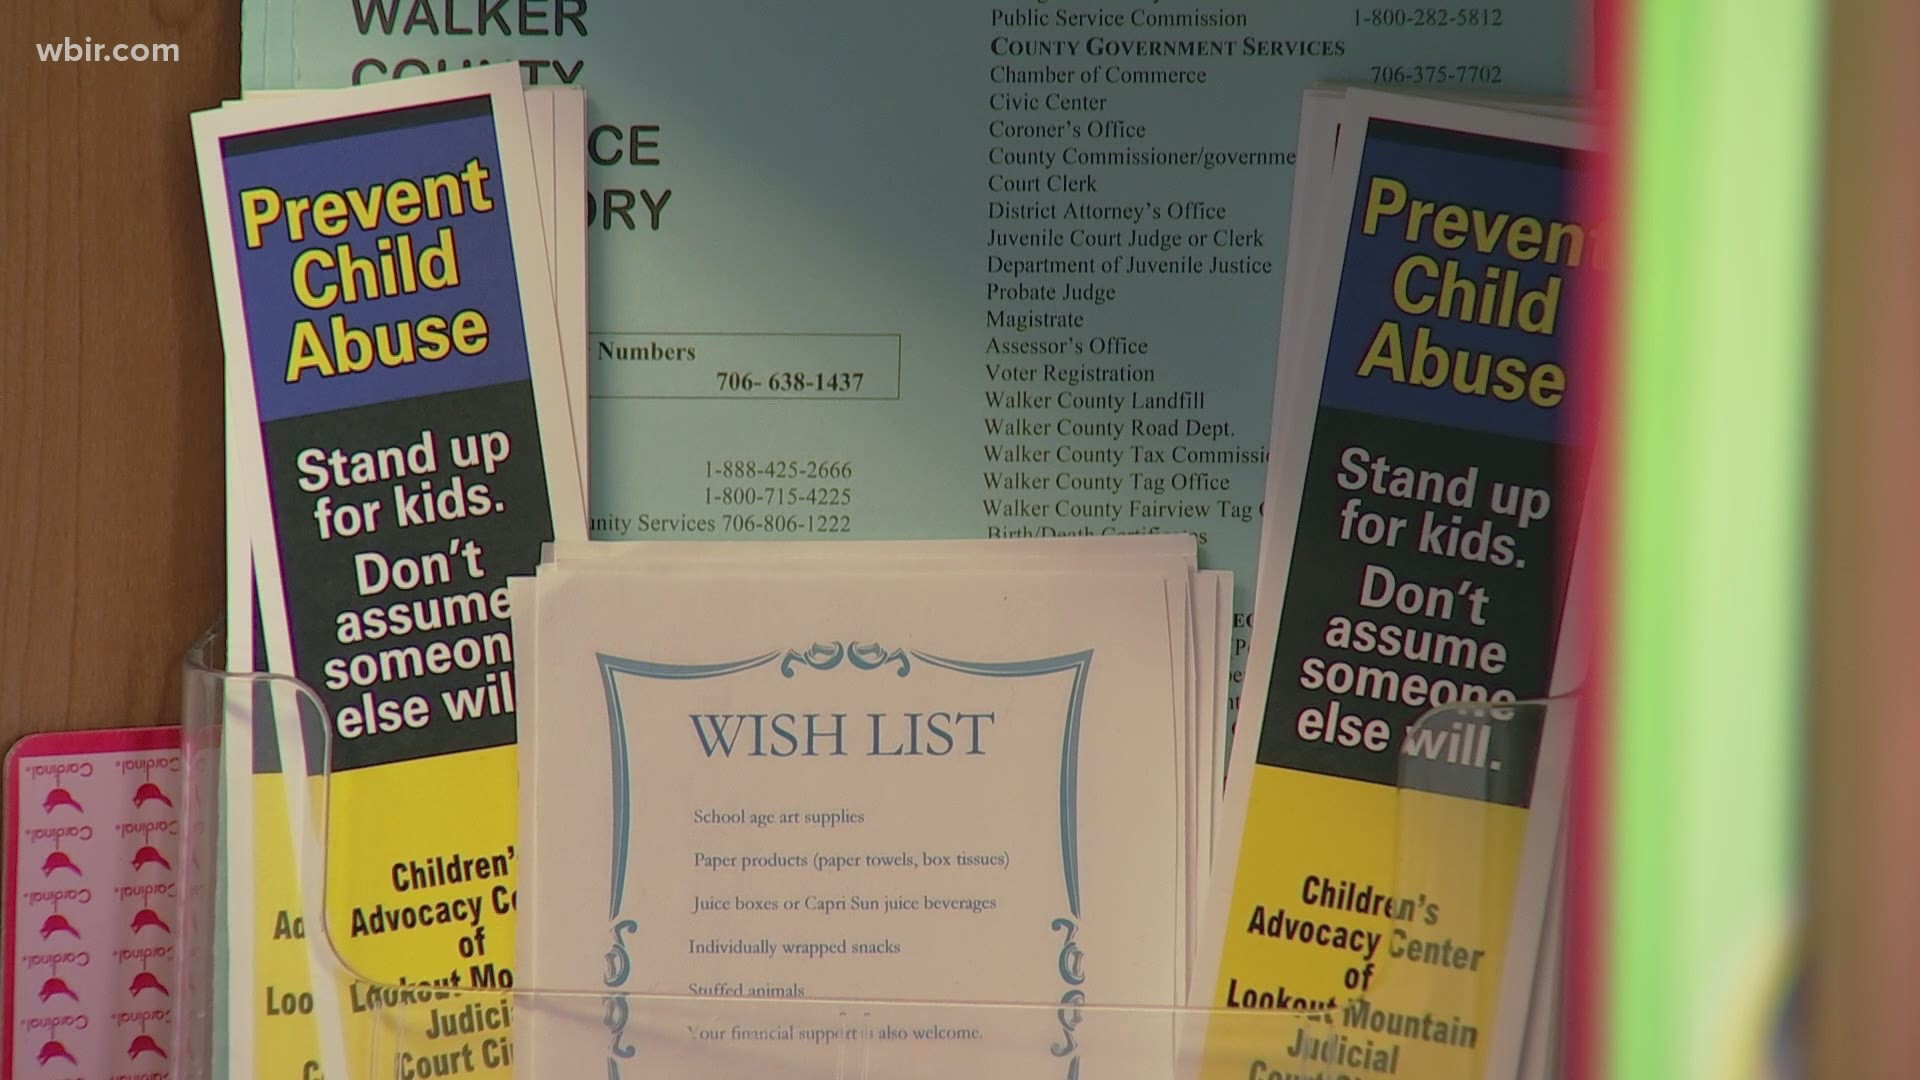 The center said that so far this year, it has received 175 reports of child abuse.